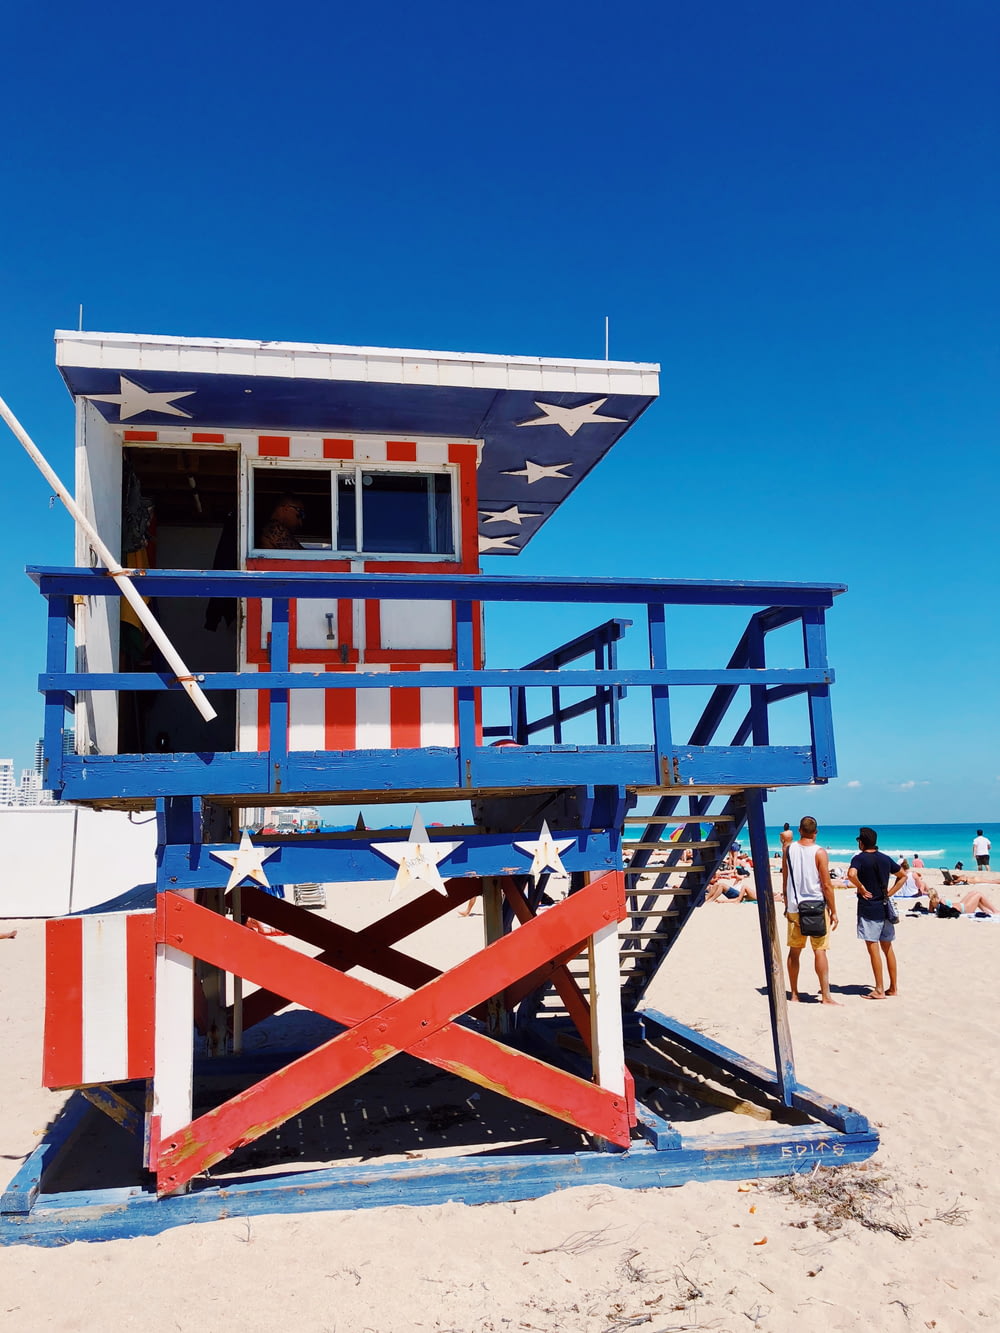 white, blue, and red American flag printed wooden lifeguard house on beach